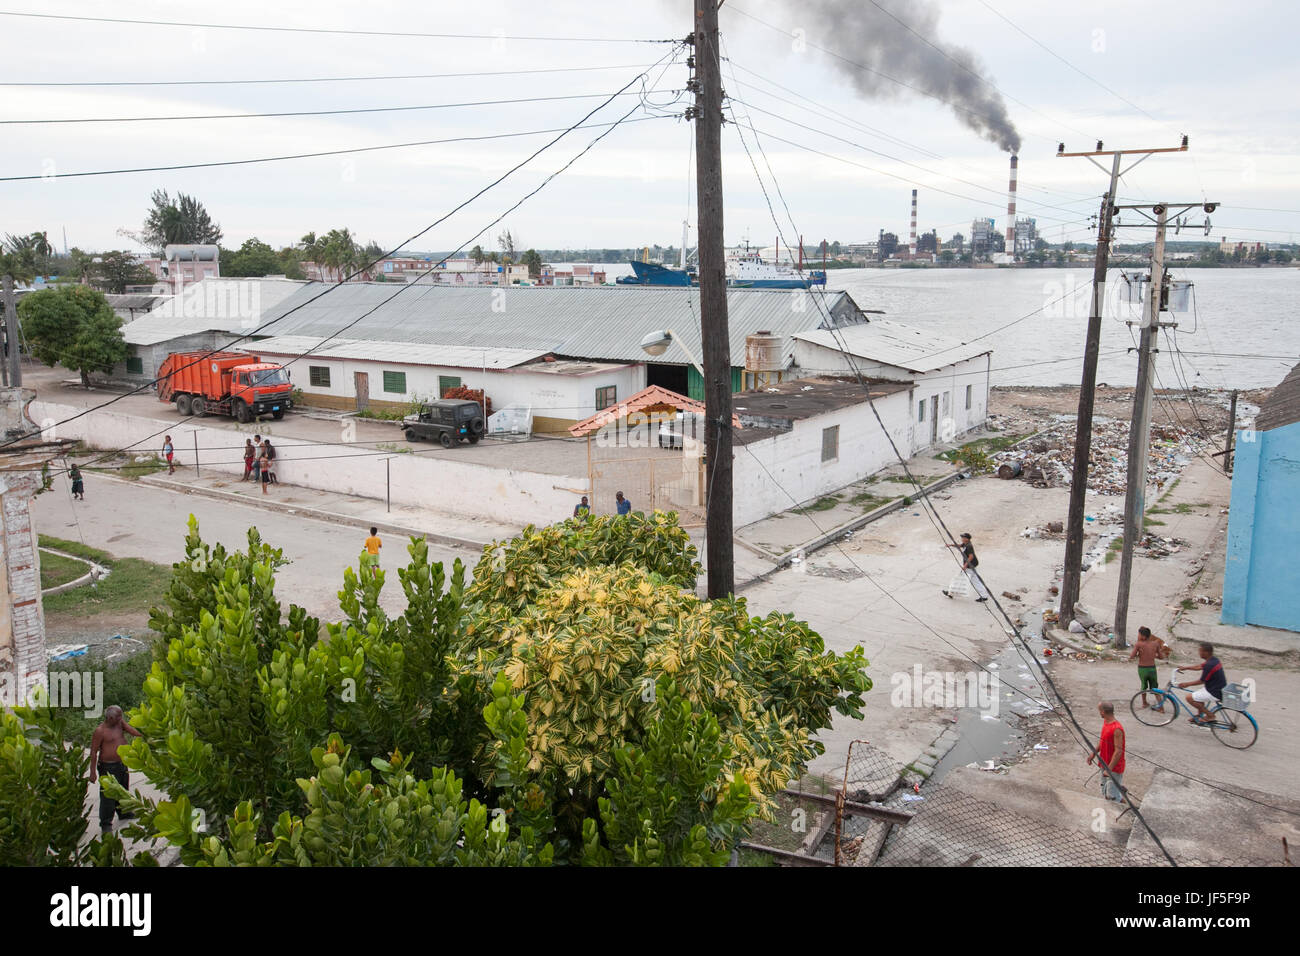 Near a port and industrial area in Cienfuegos, people walk the streets and some garbage covers a road. Stock Photo